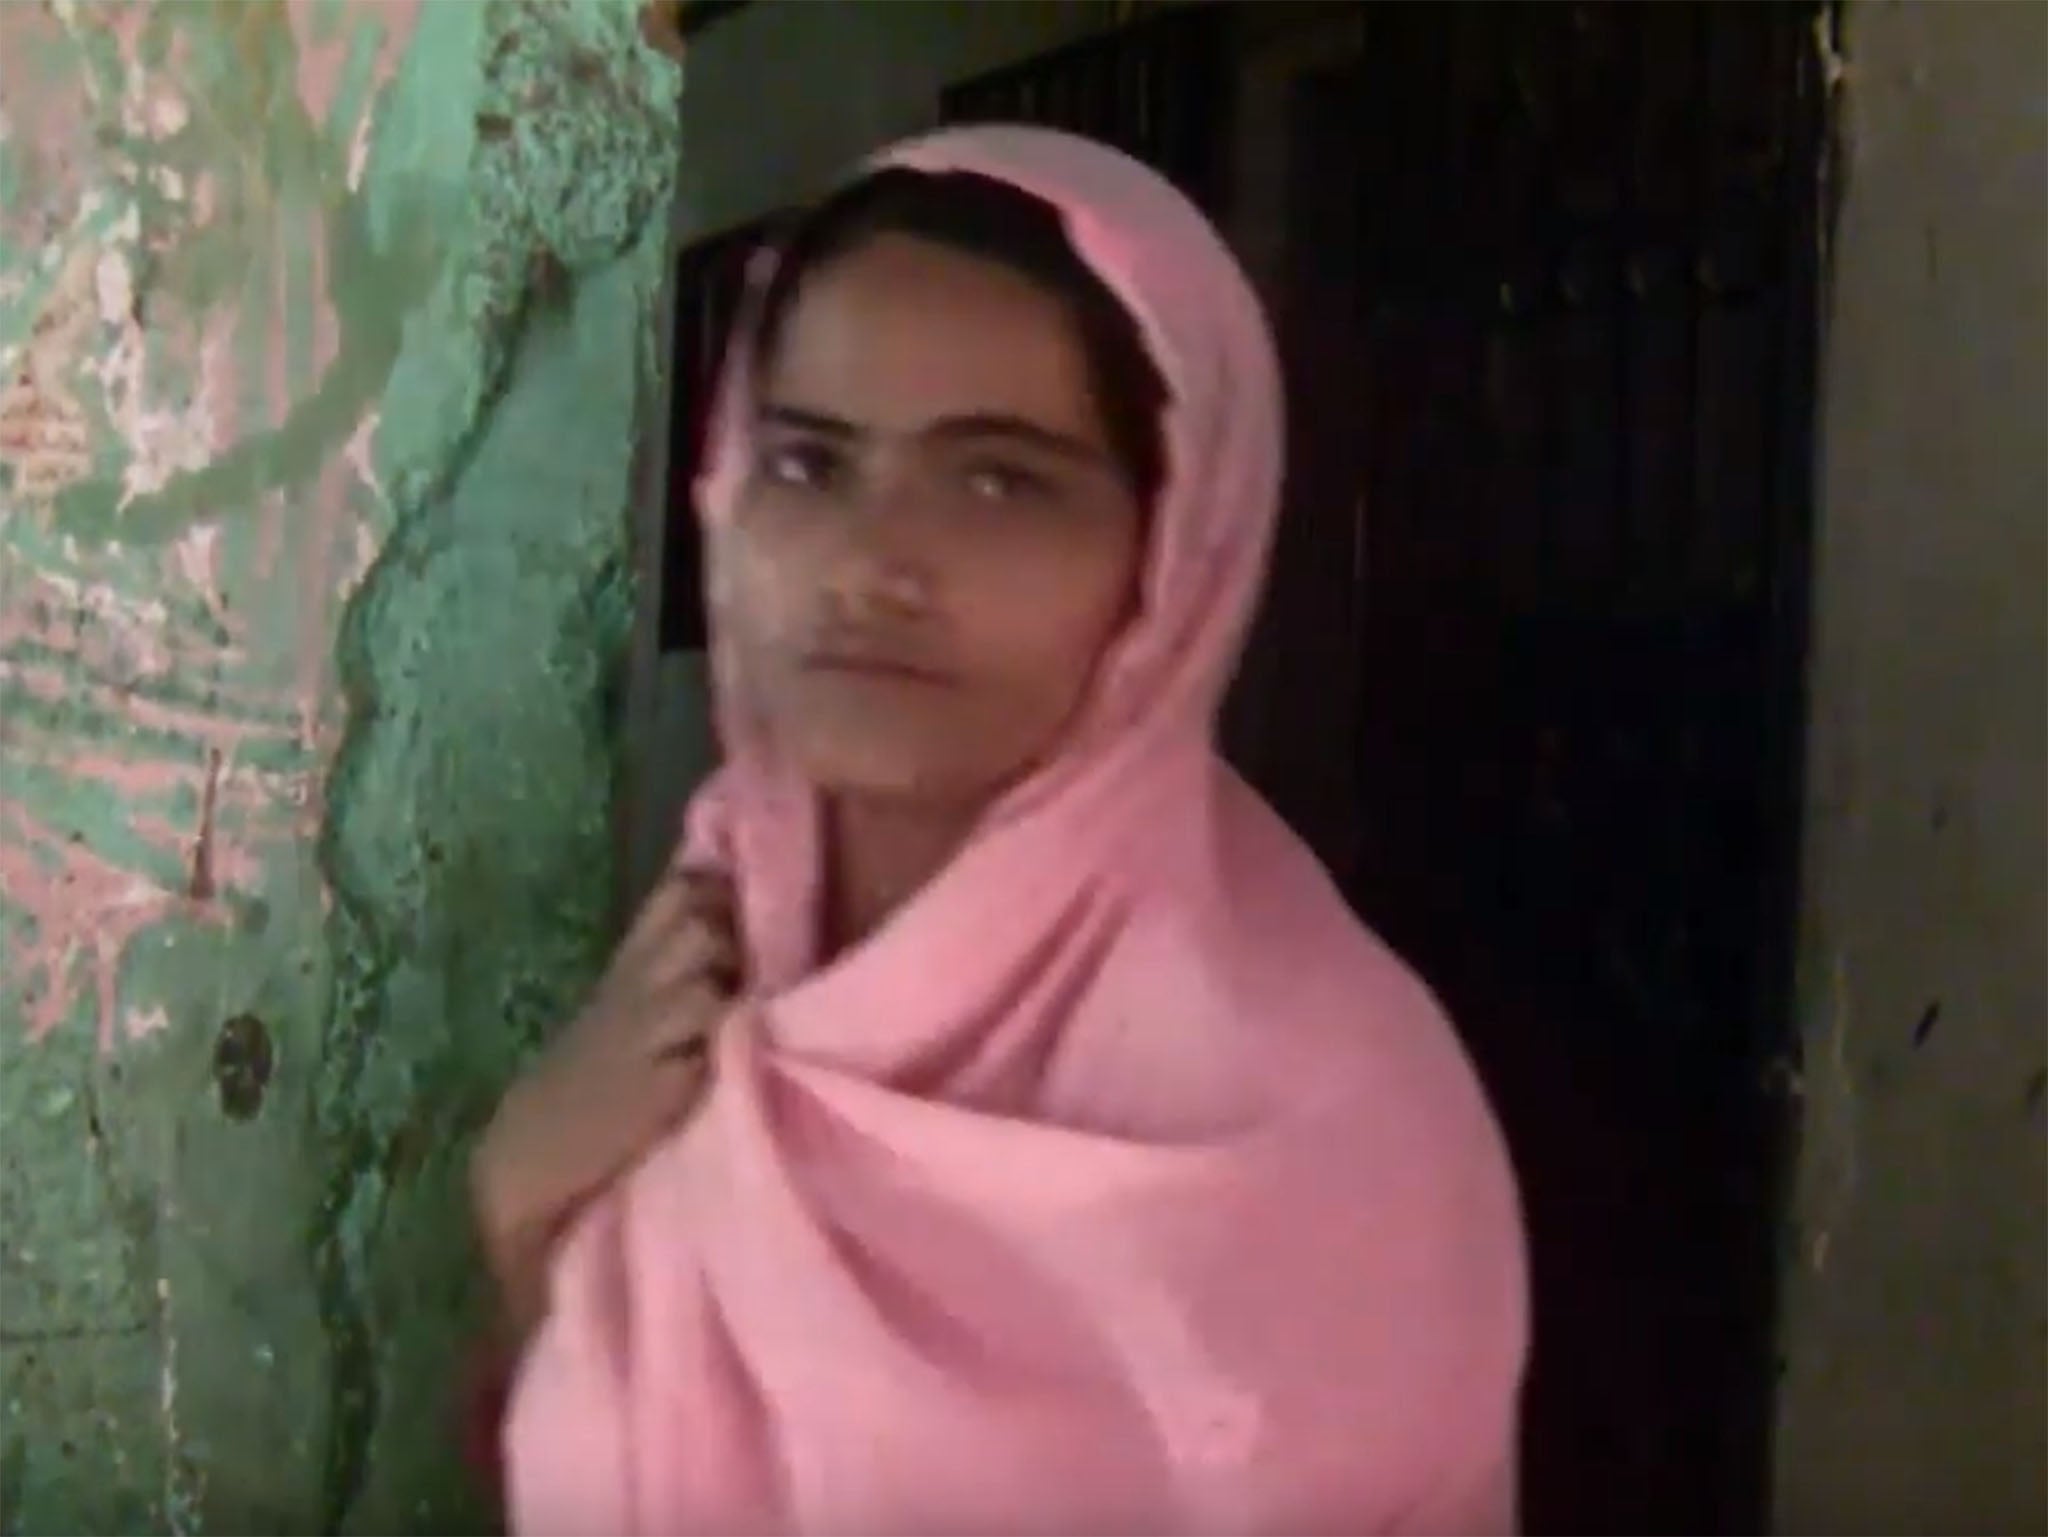 Kainat Soomra was 13-years-old when she was kidnapped and gang-raped